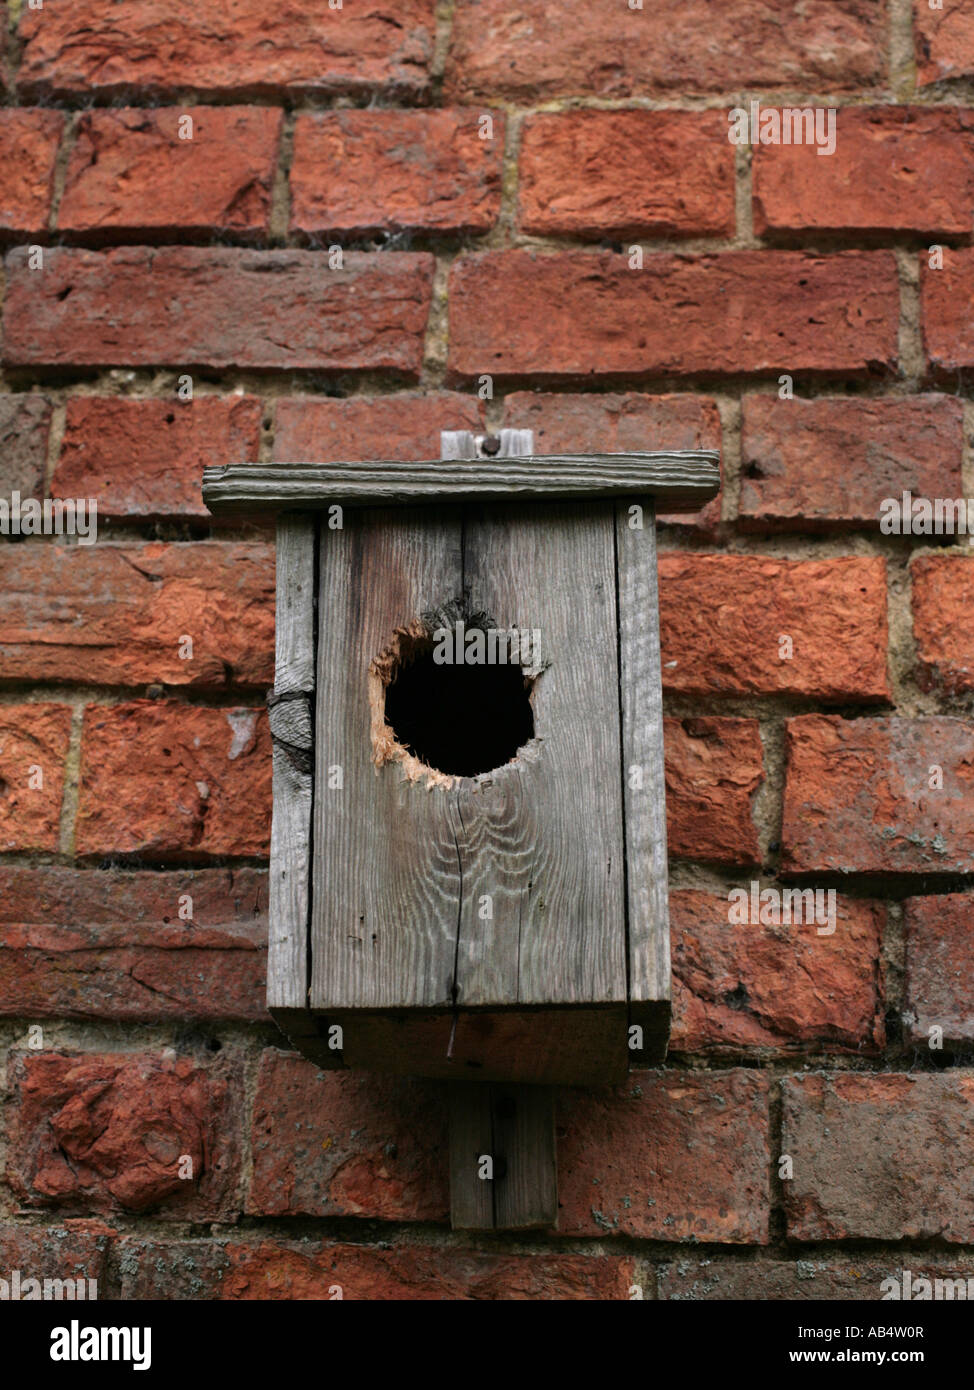 A birdbox with an extra large hole, as if a bird has been putting on weight. Stock Photo